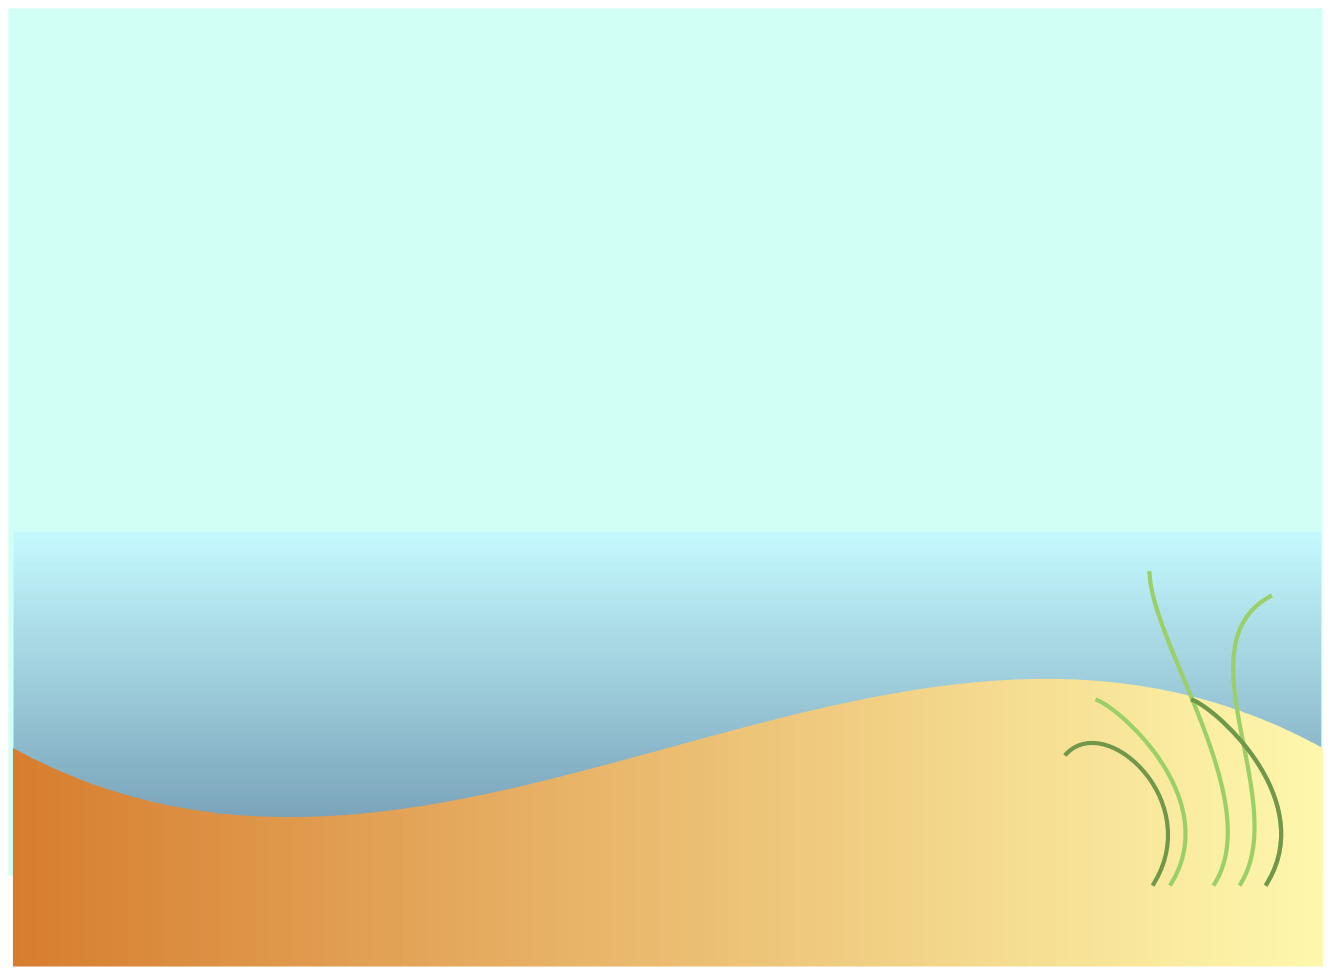 free clipart images of the beach - photo #6